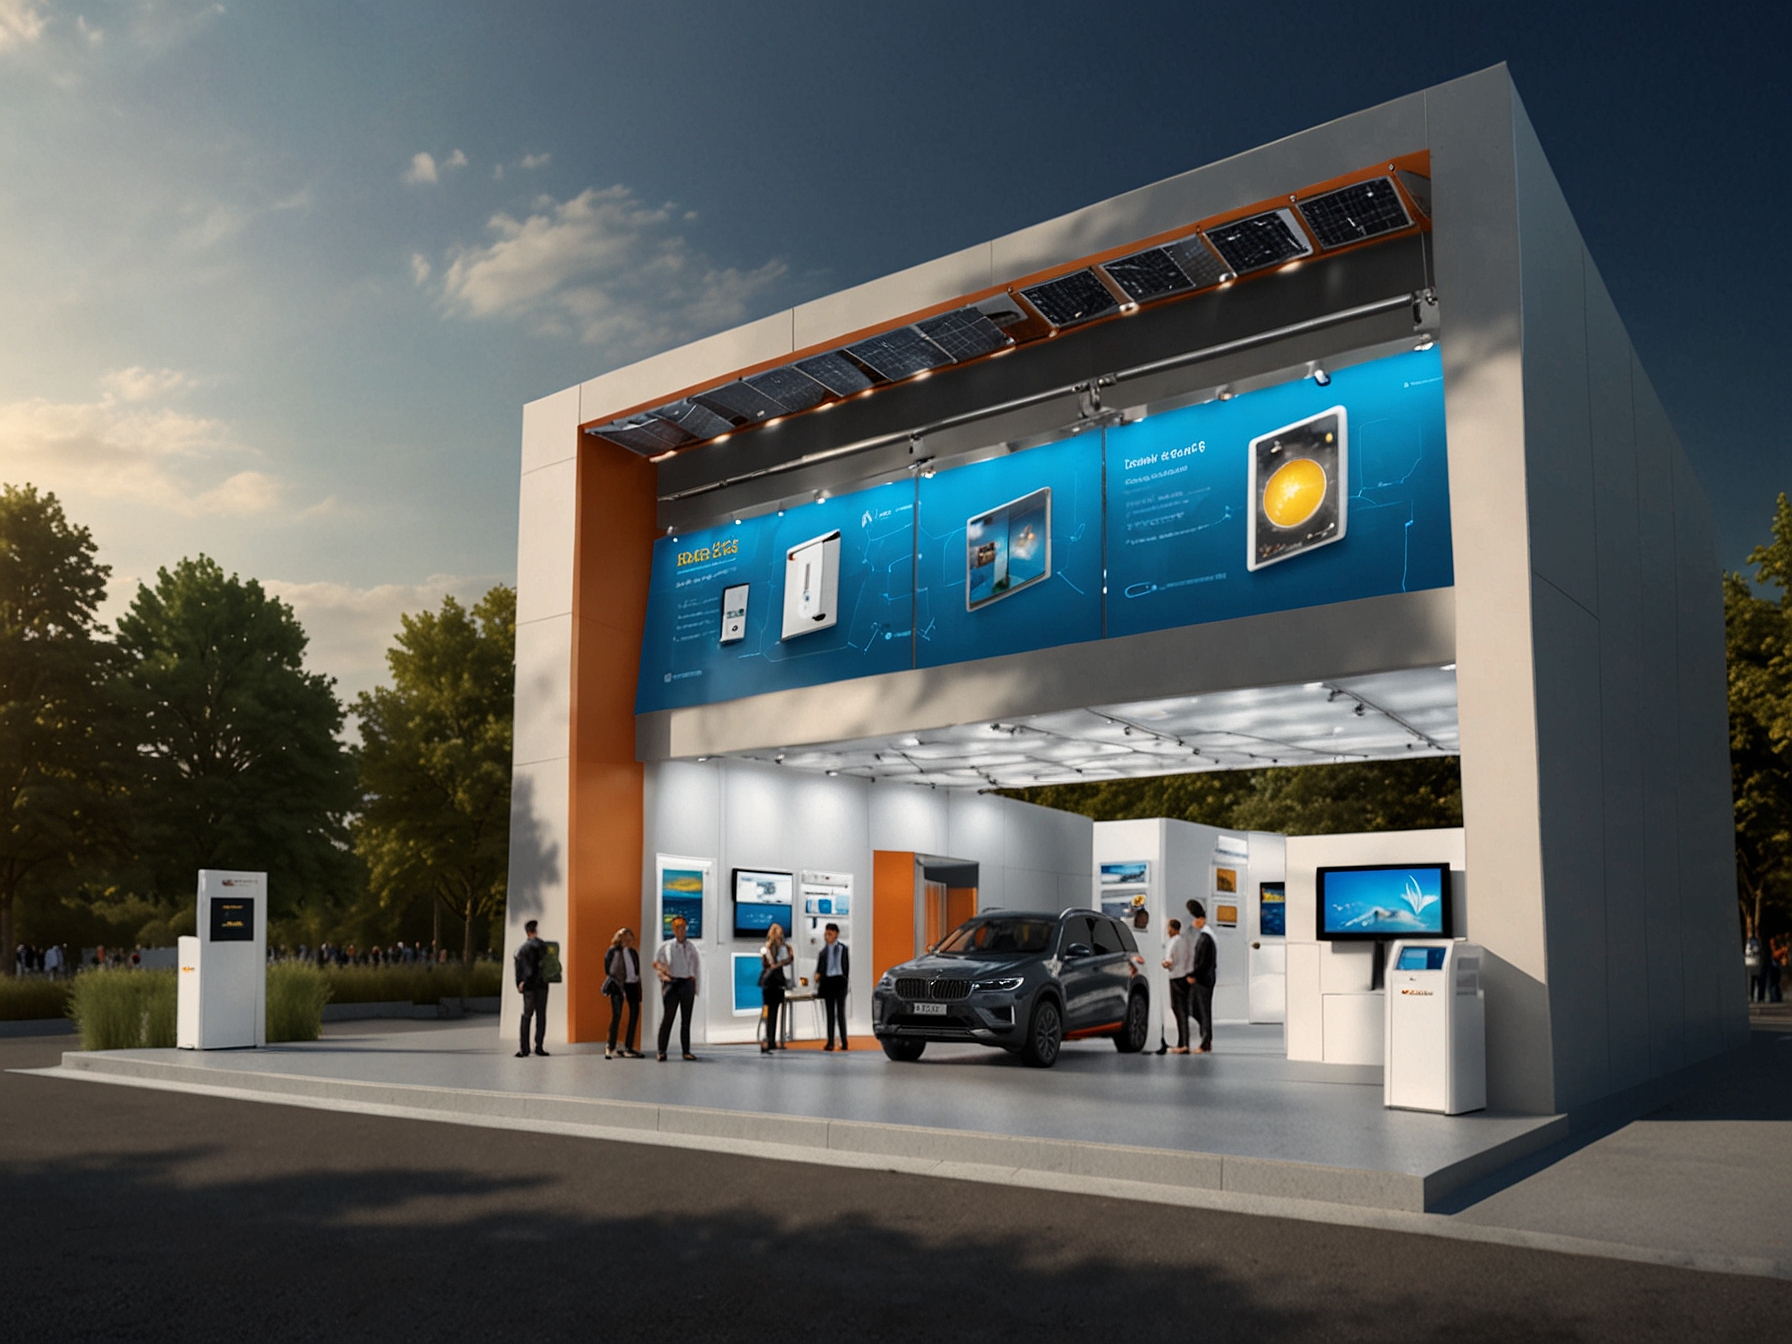 Beny's booth at Intersolar Europe 2024, featuring live demonstrations of their solar power inverters, energy storage systems, and smart energy management technologies.